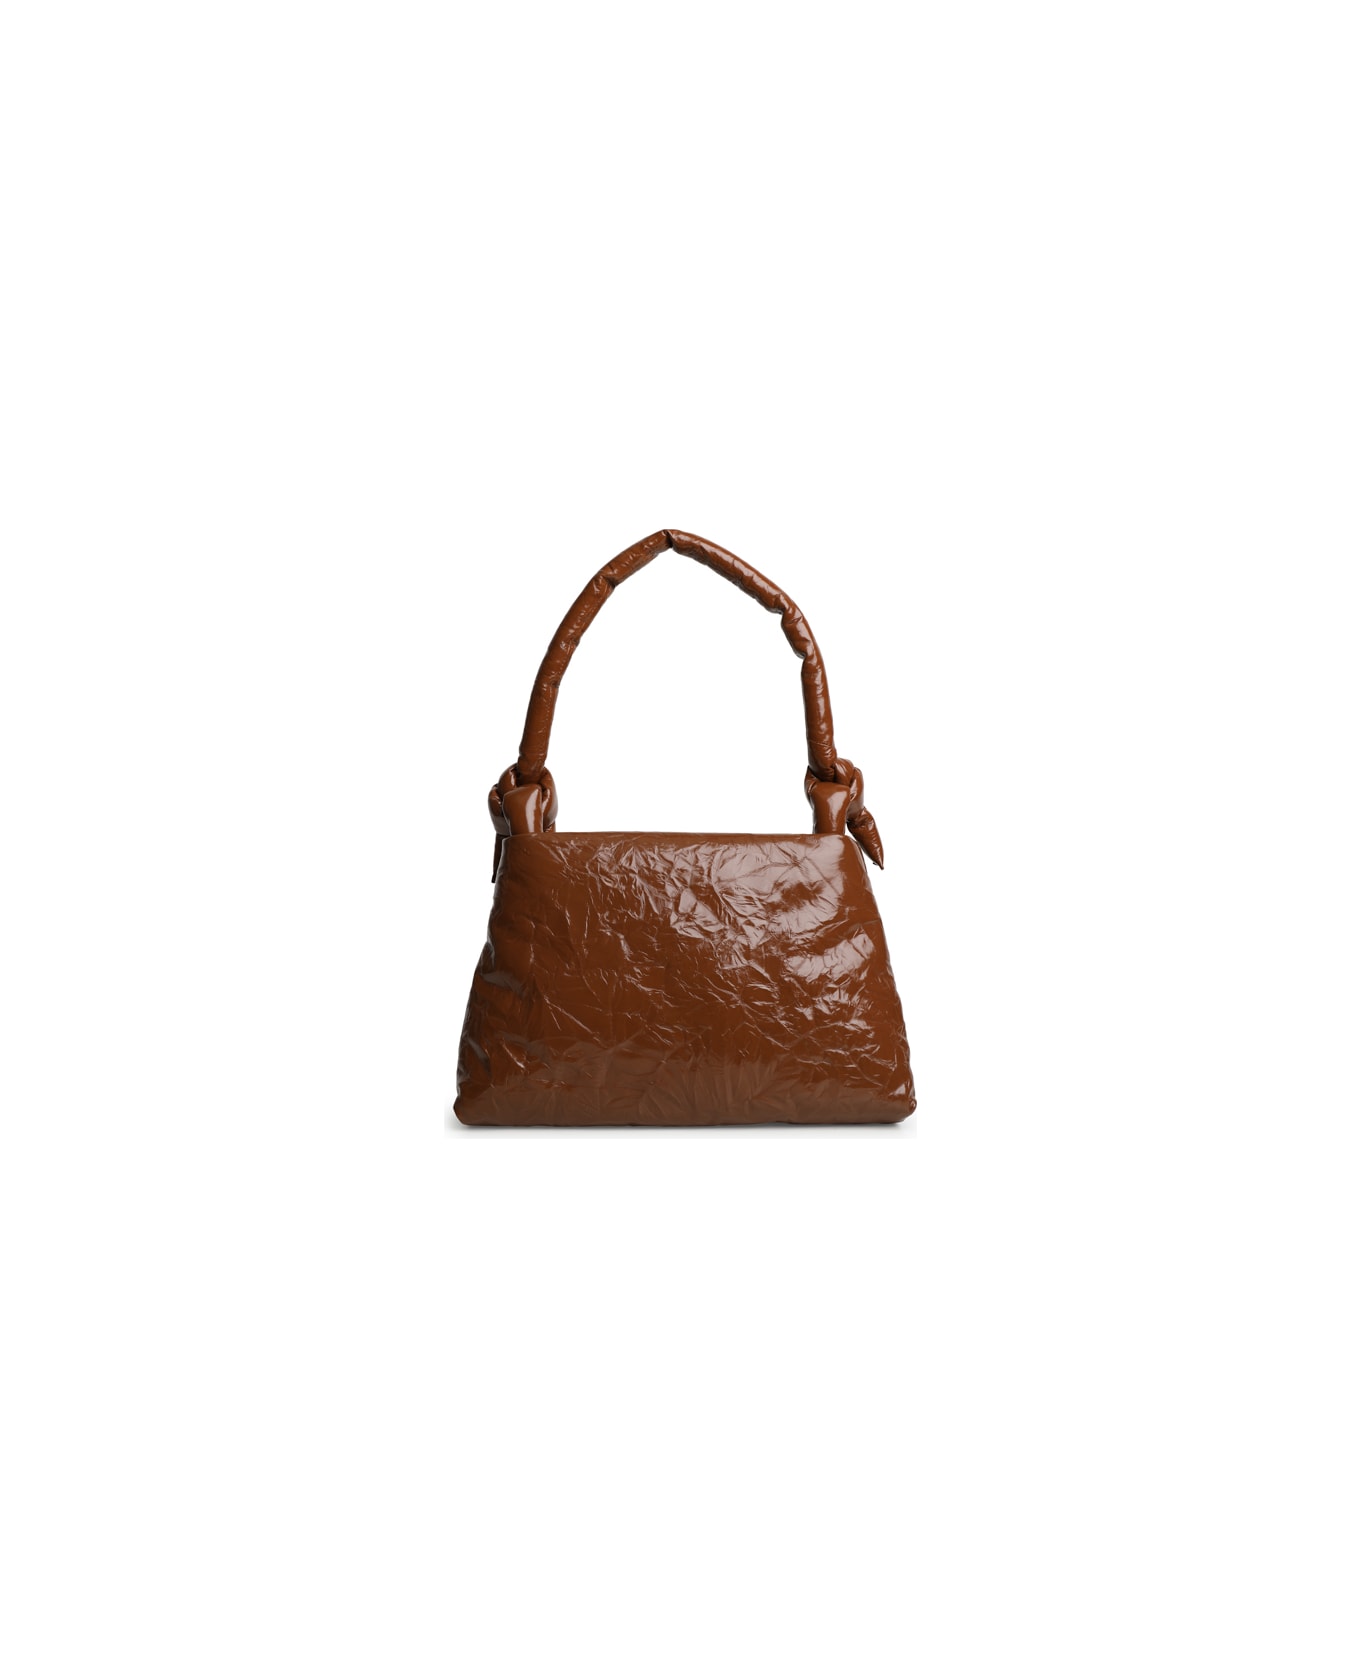 KASSL Editions Lady Bag With Side Knots - Cognac トートバッグ